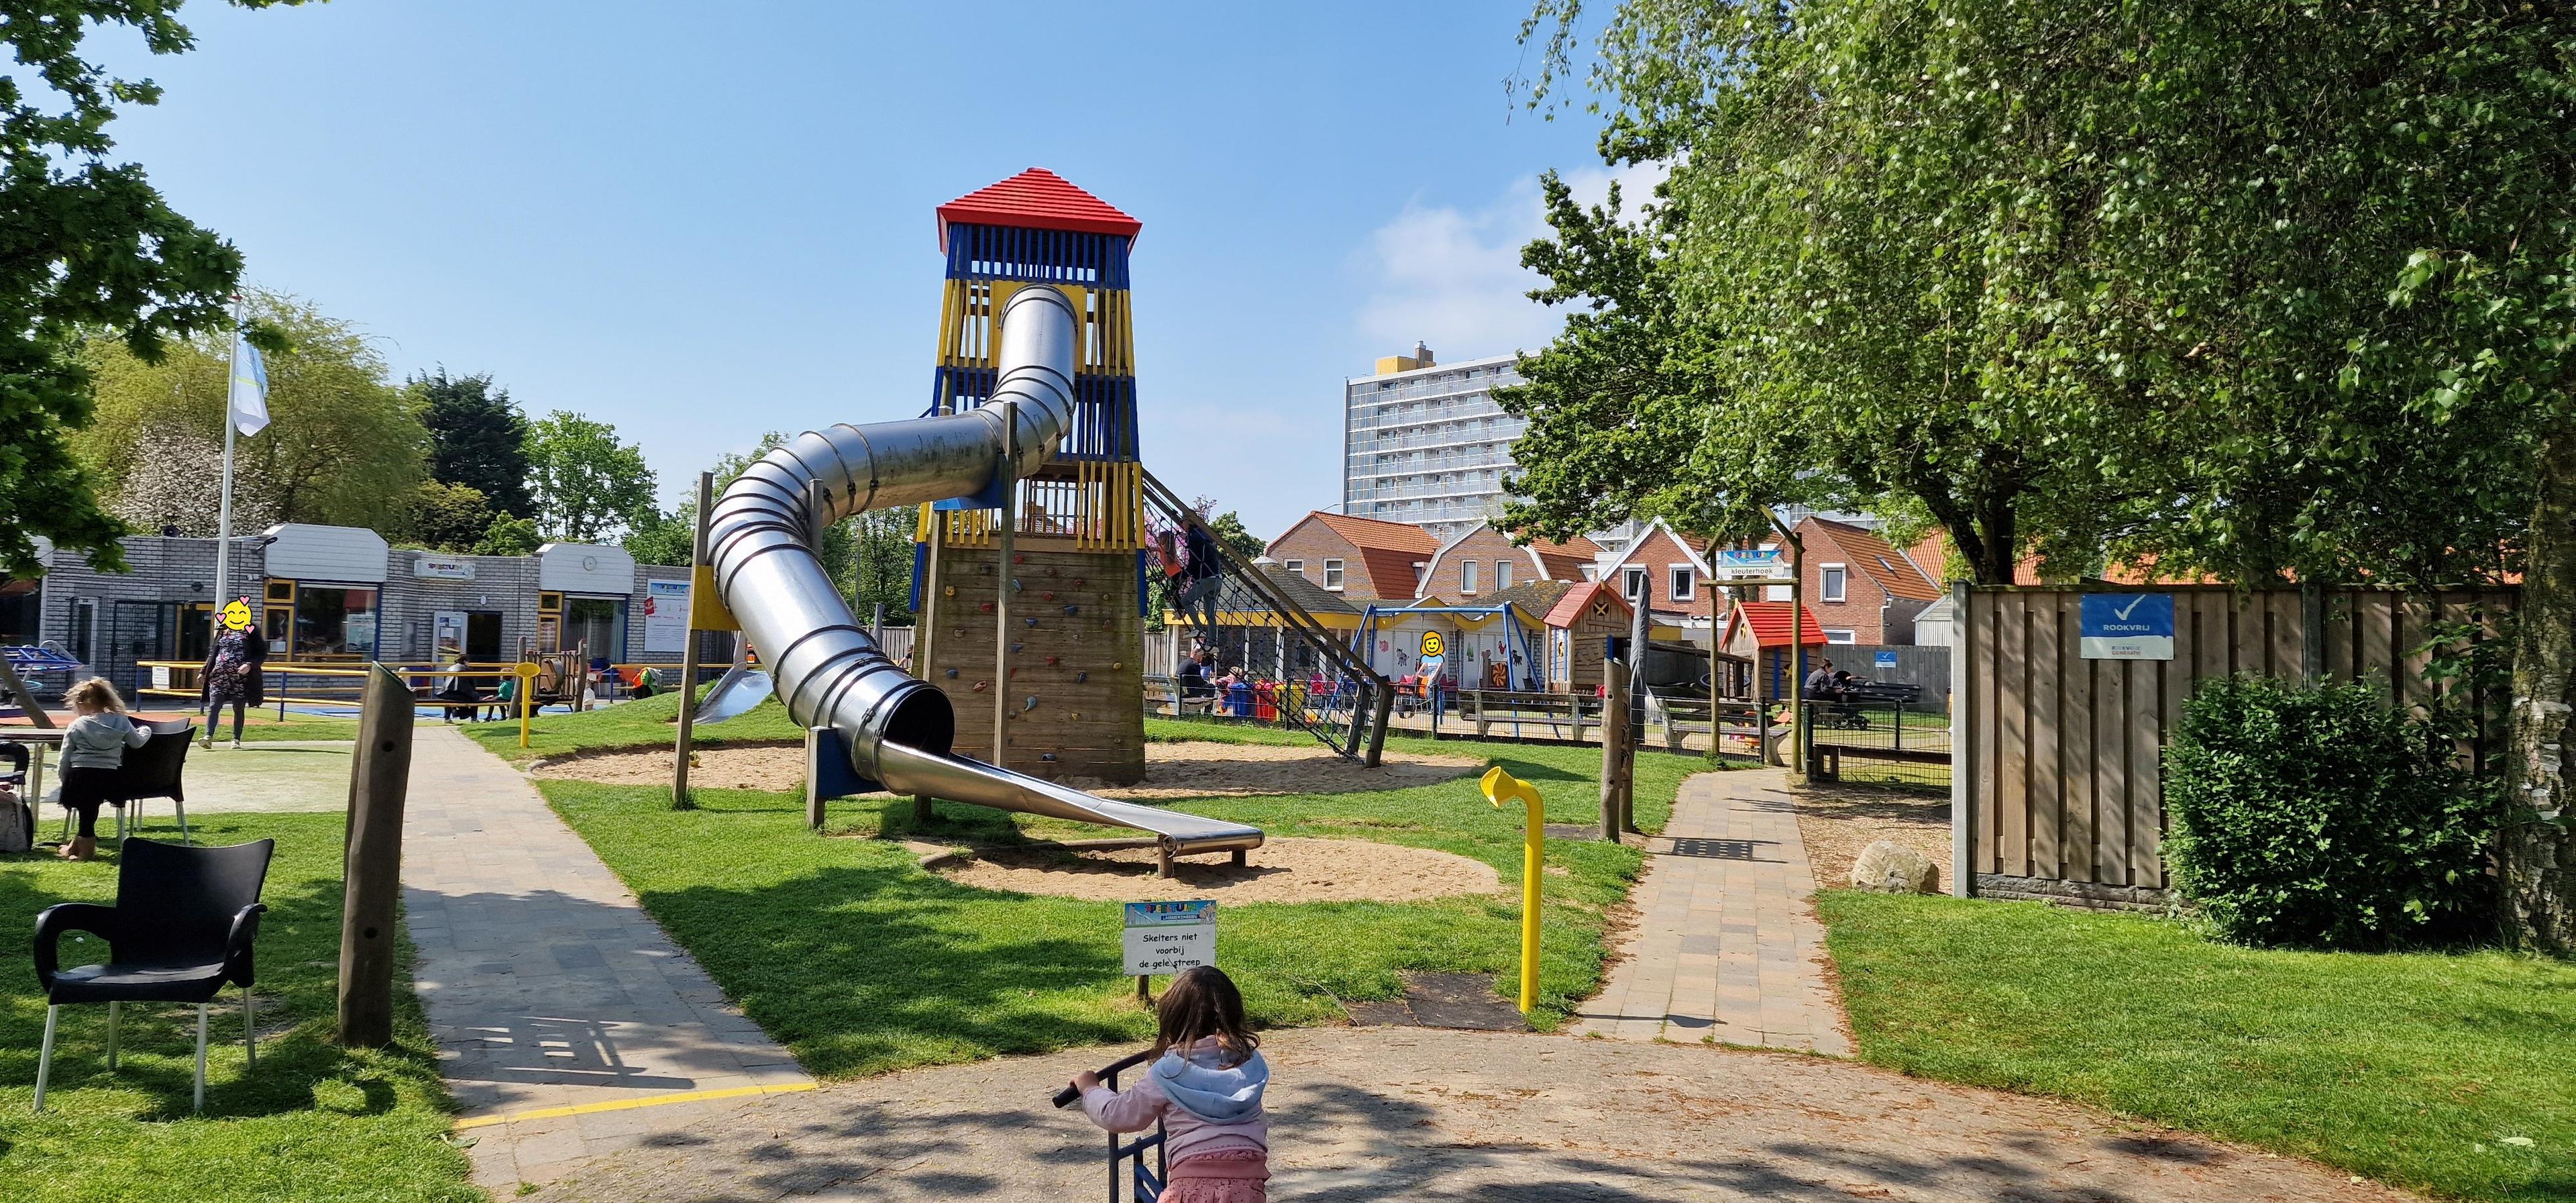 Photo of the large climbing tower with slide